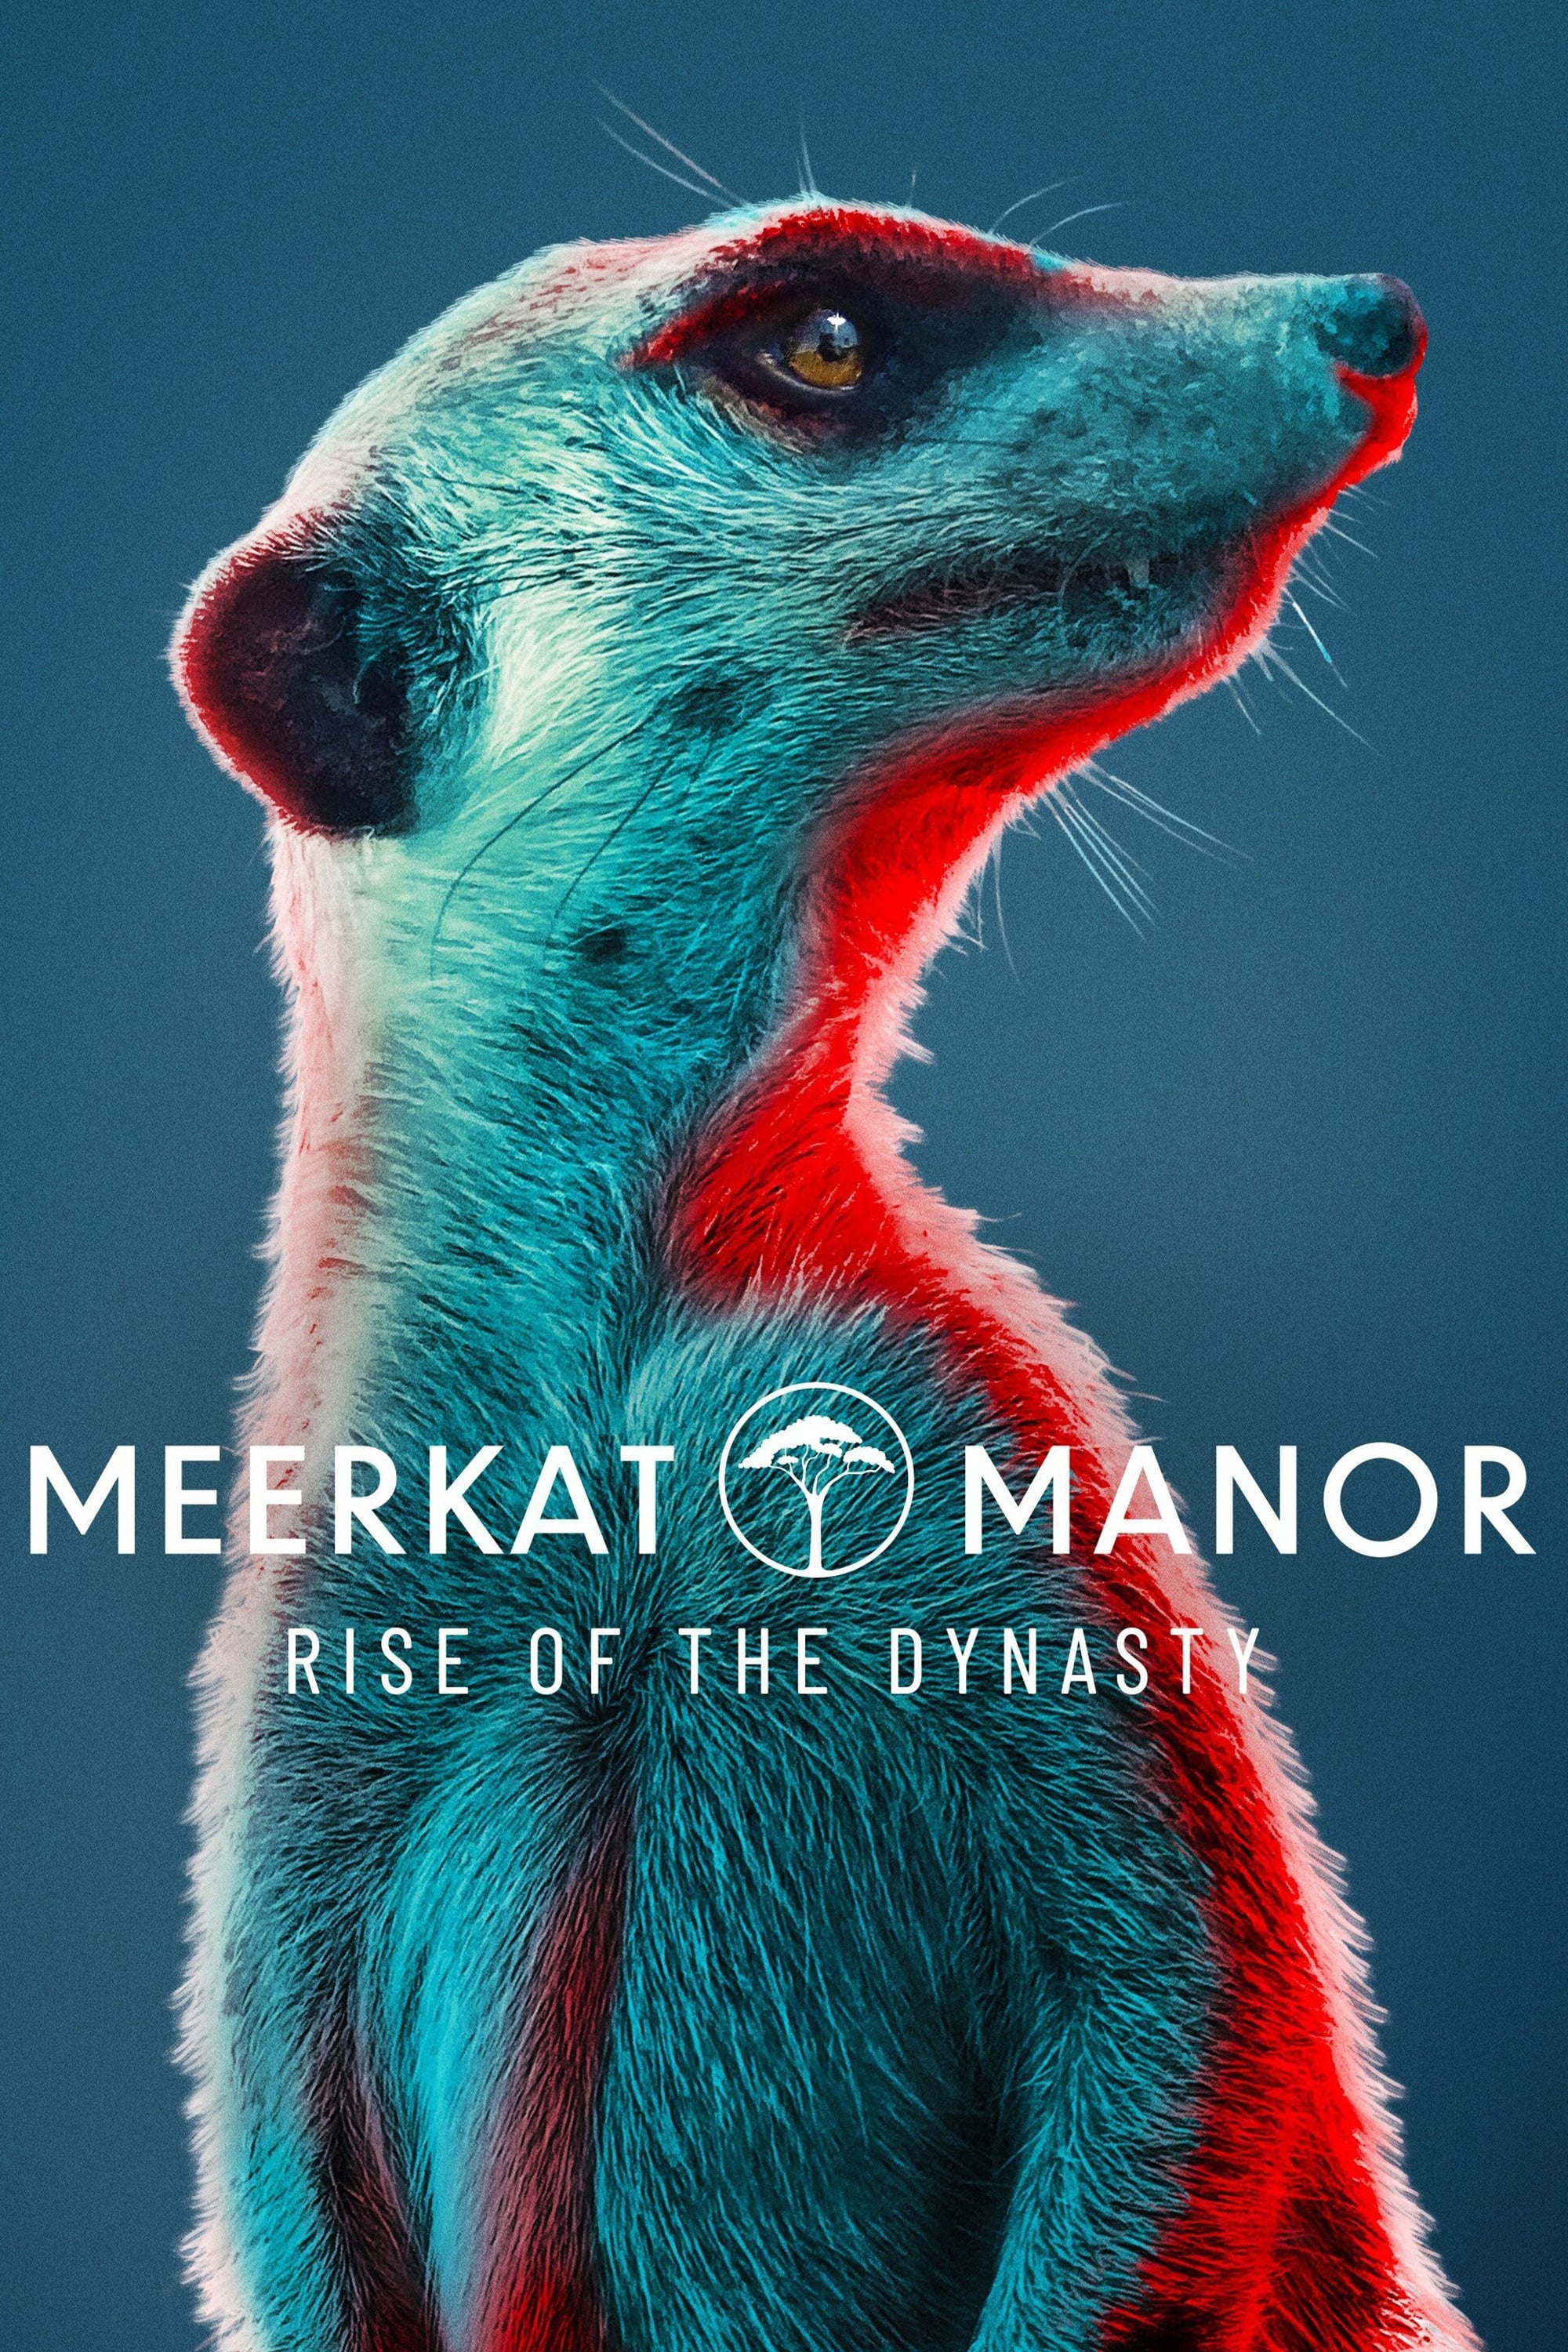 Meerkat Manor: Rise of the Dynasty TV Shows About Nature